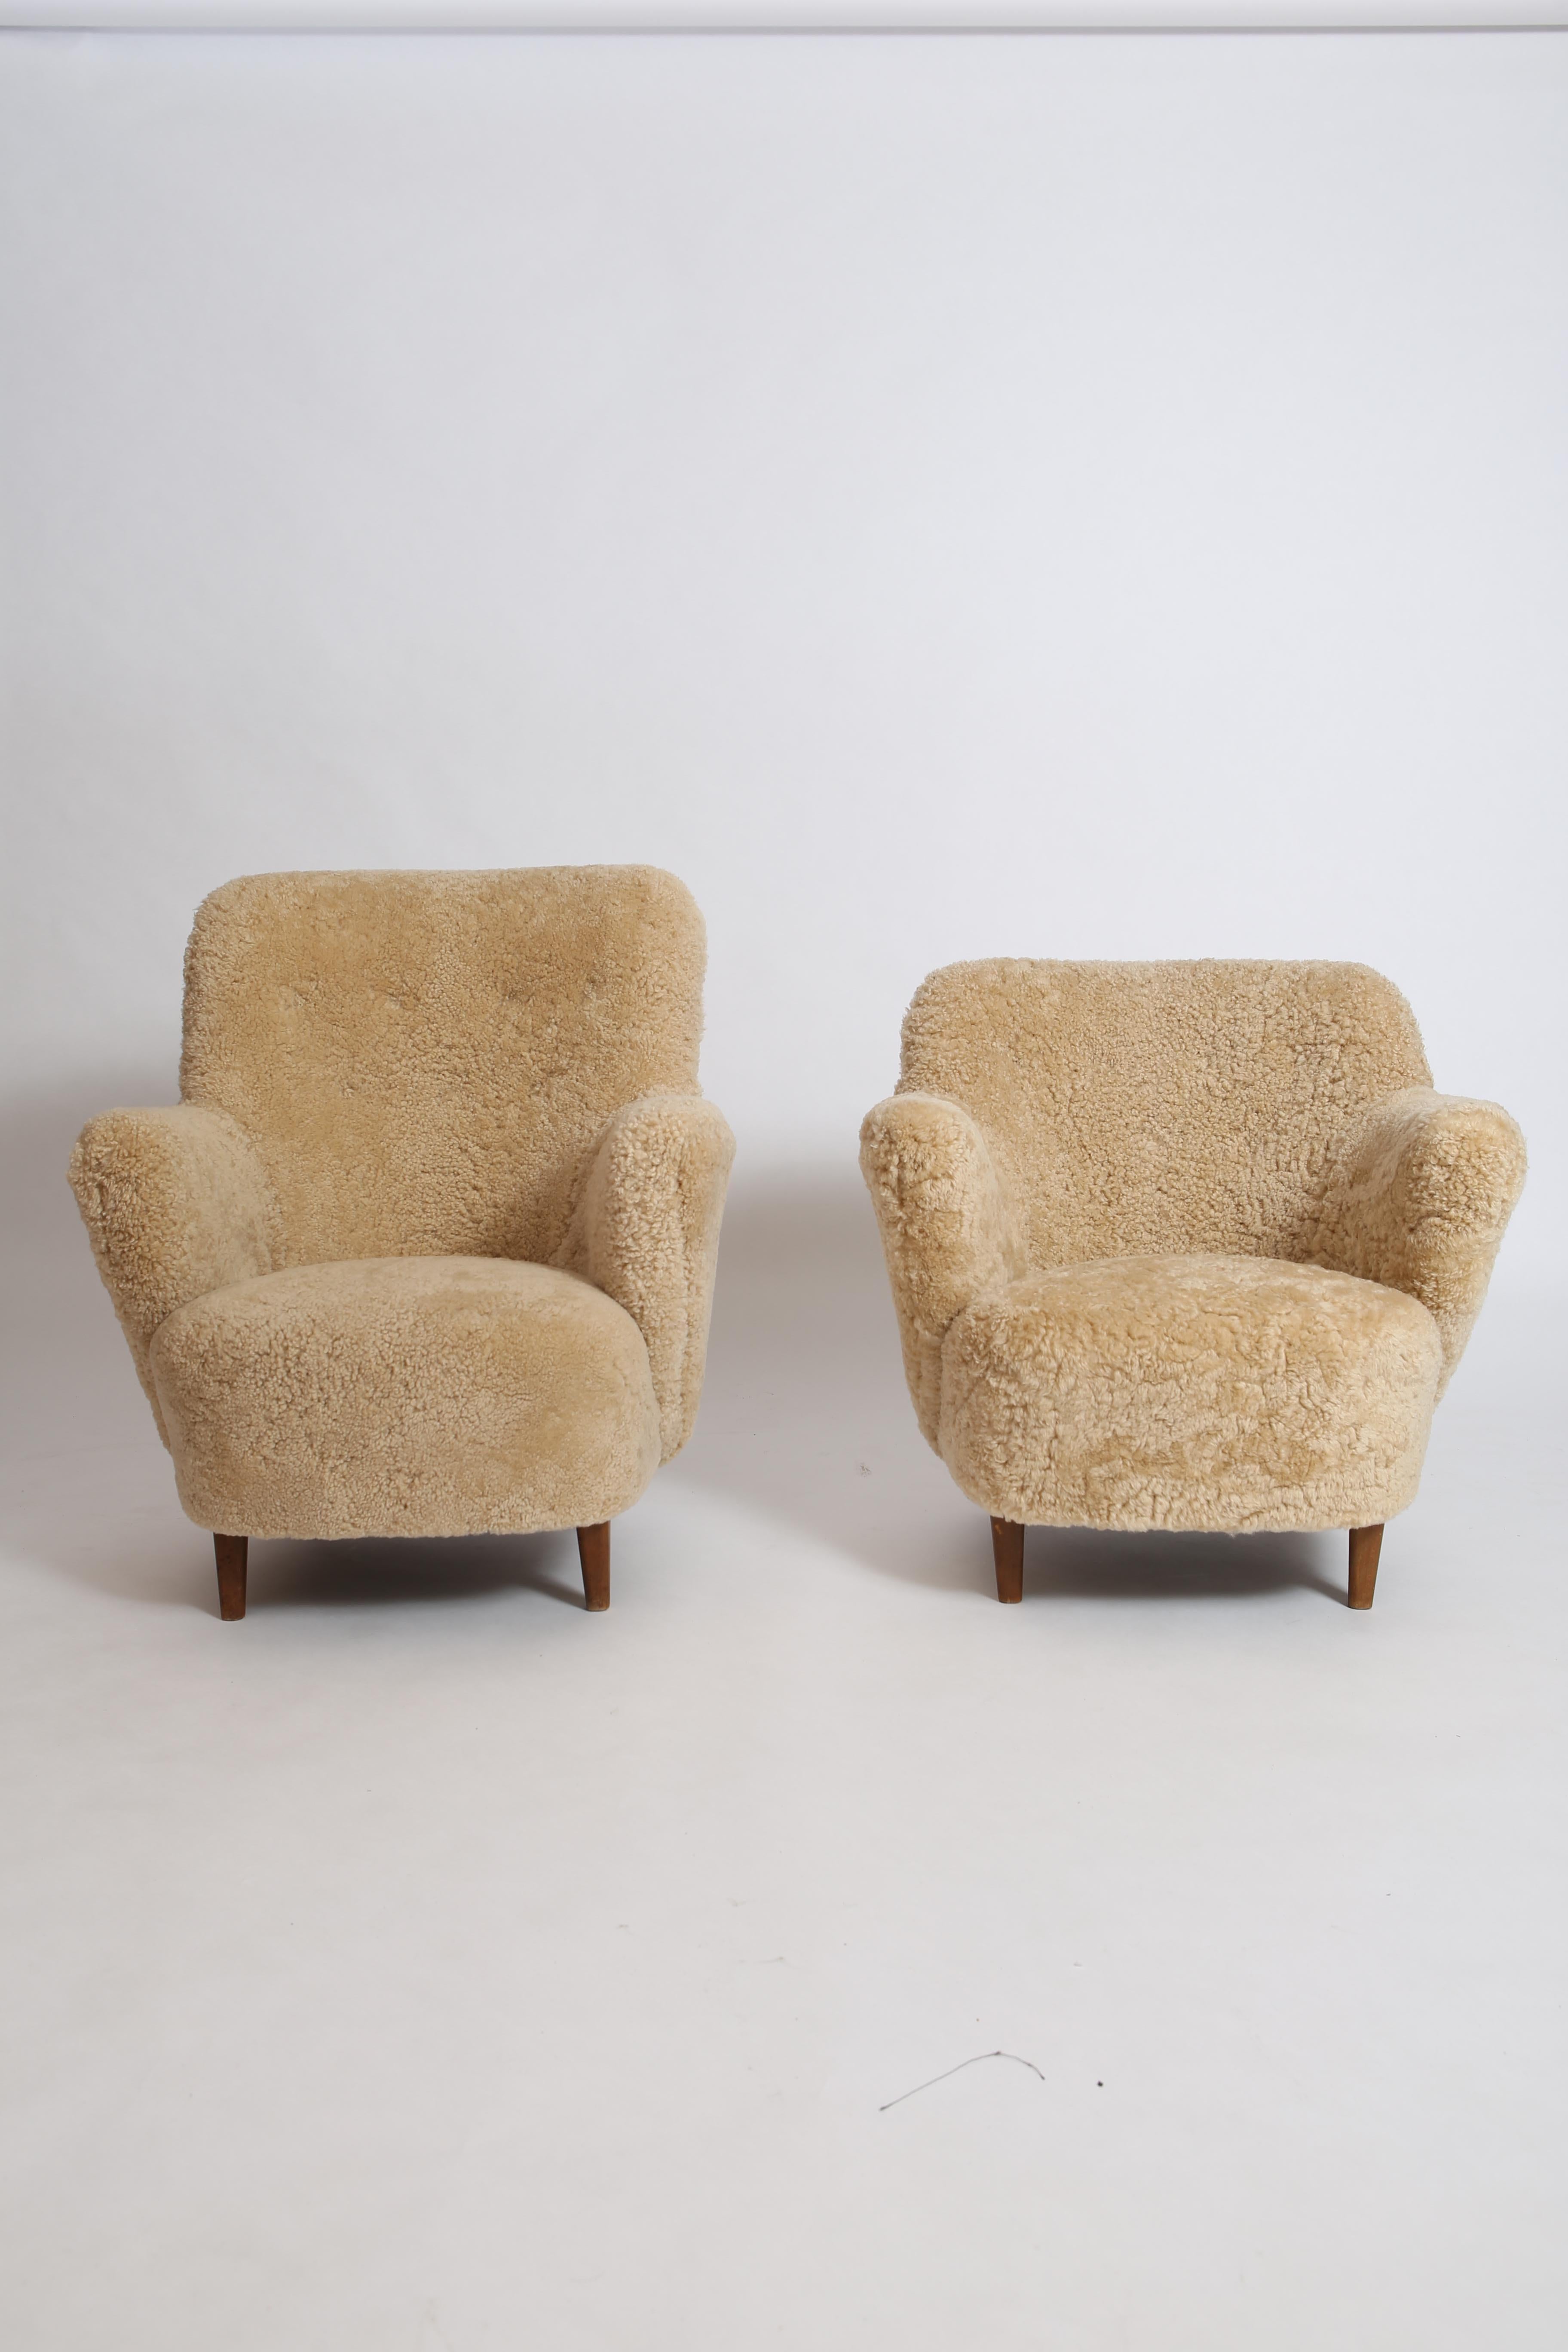 Wonderful matched “his and hers” pair of Danish Cabinetmaker armchairs freshly upholstered in natural sheepskin. 
Elegant lines, these chairs are beautiful from different angles-finished with button-tufted backrests, hand-tied springs and all new